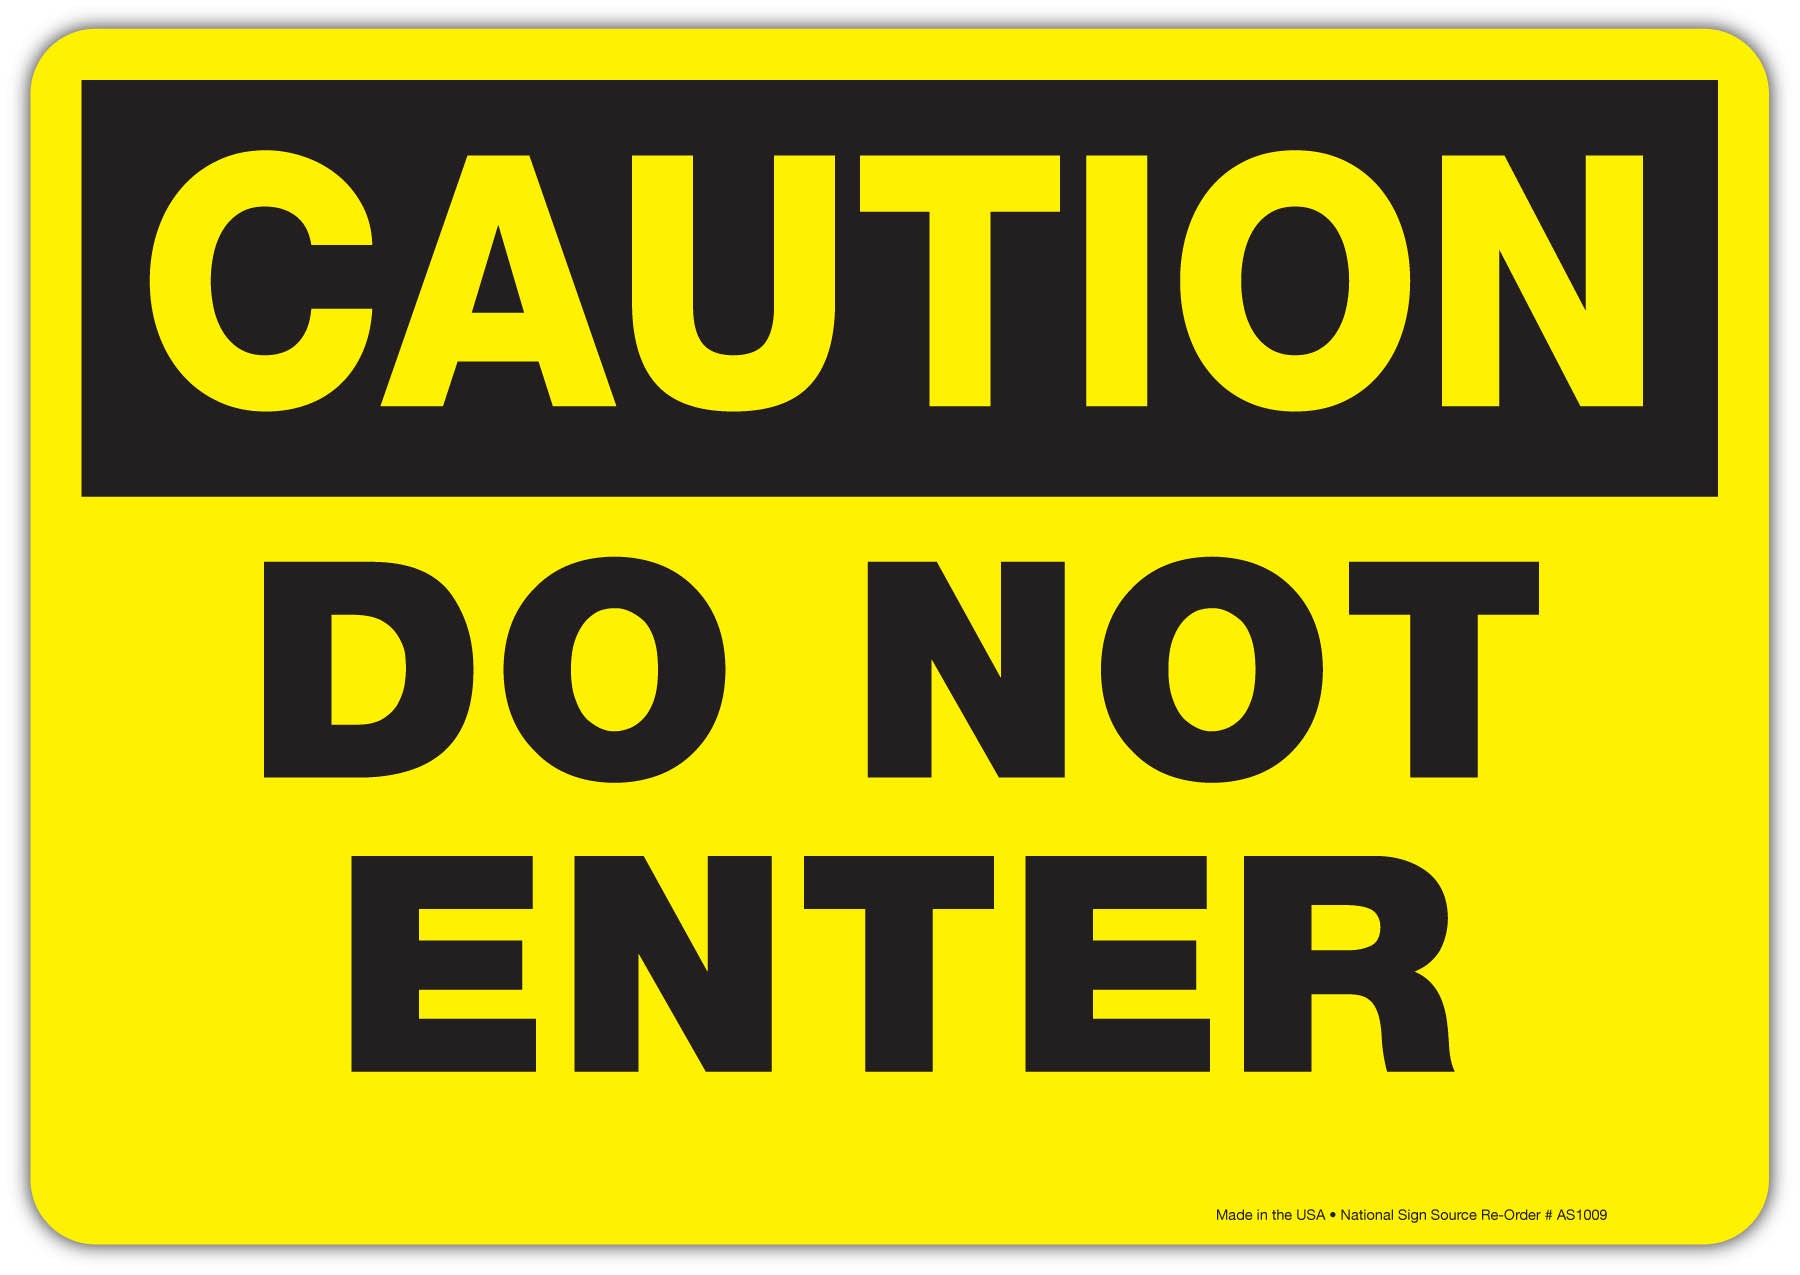 Caution Do Not Enter sign.  Aluminum sign and vinyl decal options available.